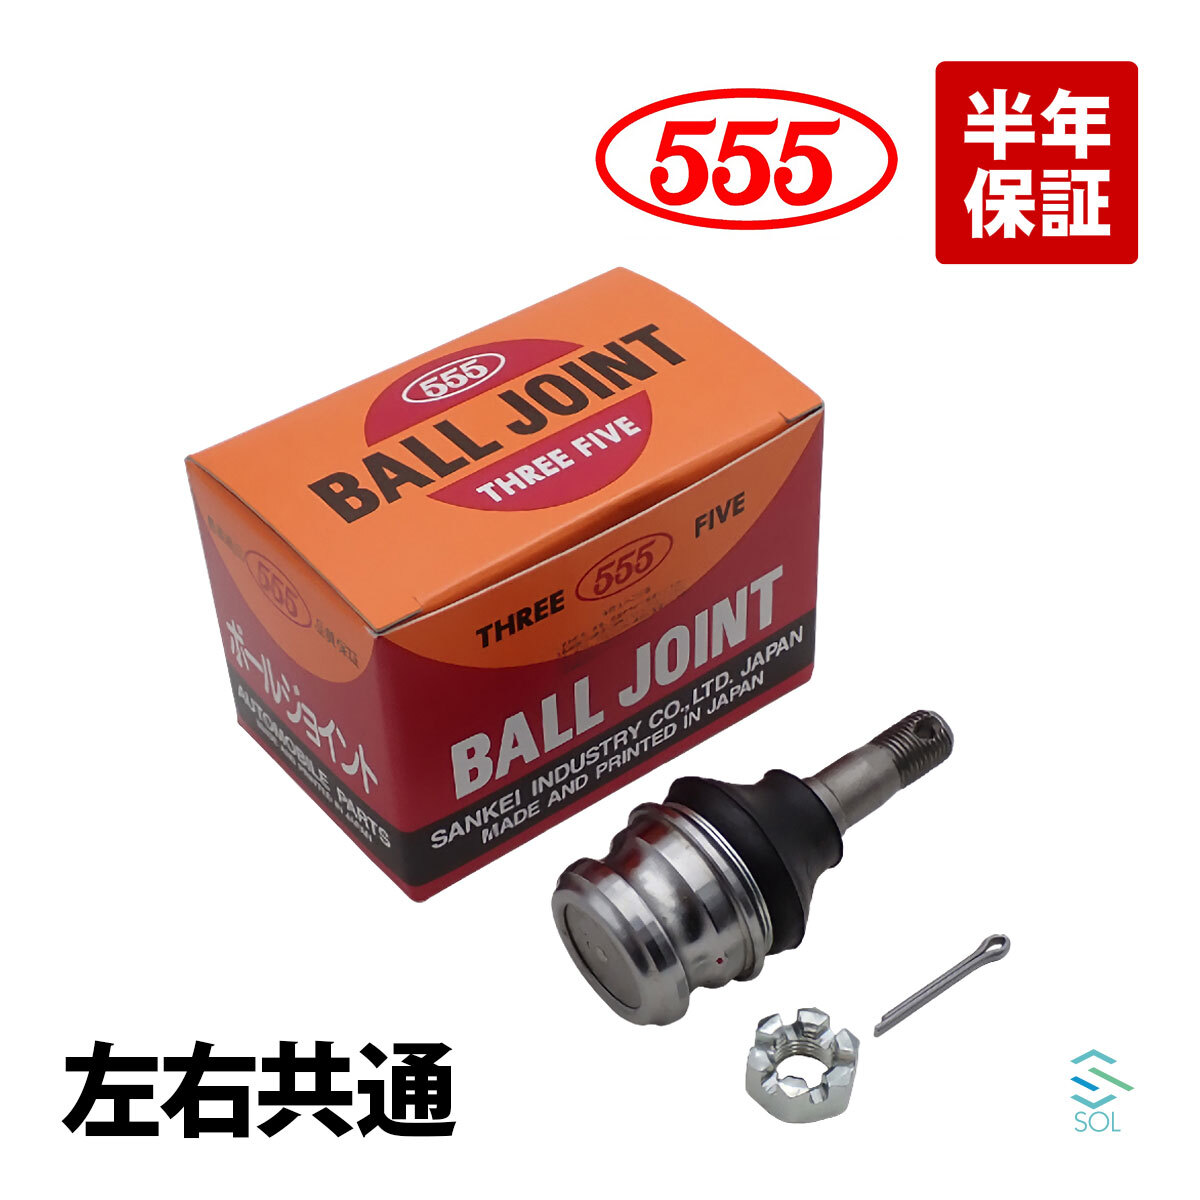  Leone AA2 ball joint left right common one side 555 three . industry s Lee five SB-6612 7210-67004 18 o'clock till the same day shipping 